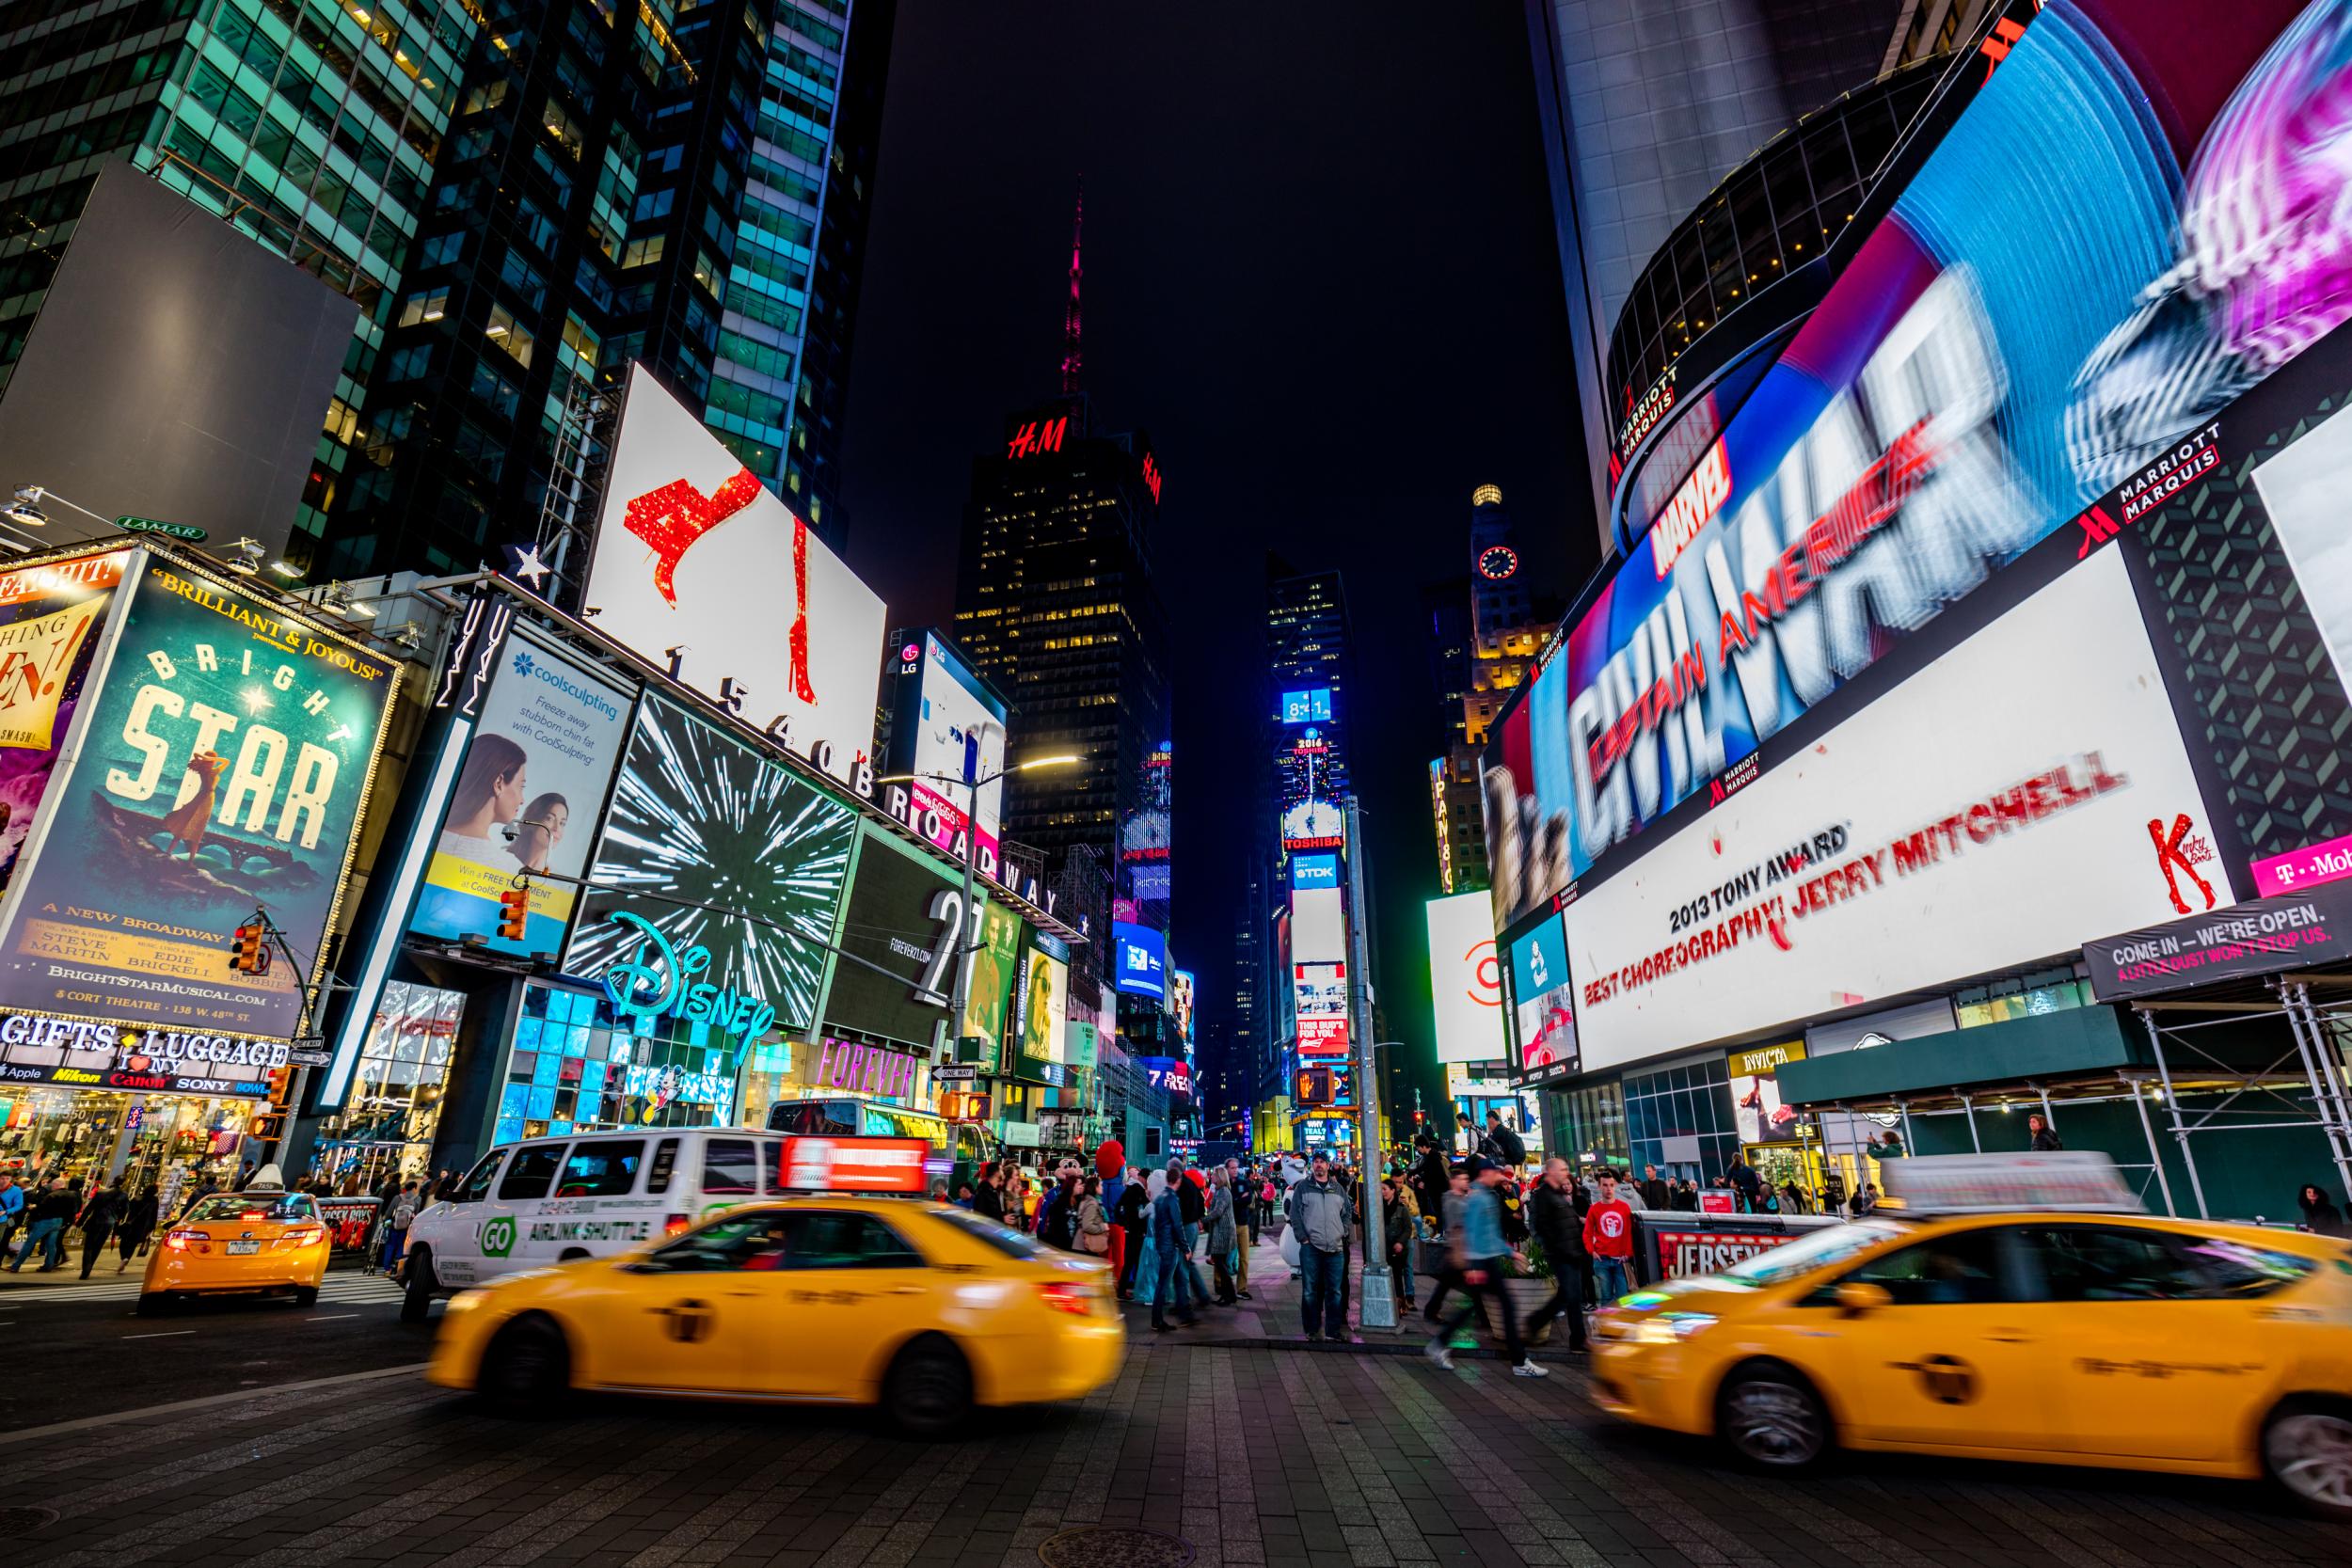 After feasting on food, sleep it off in Moxy Times Square (iStock)